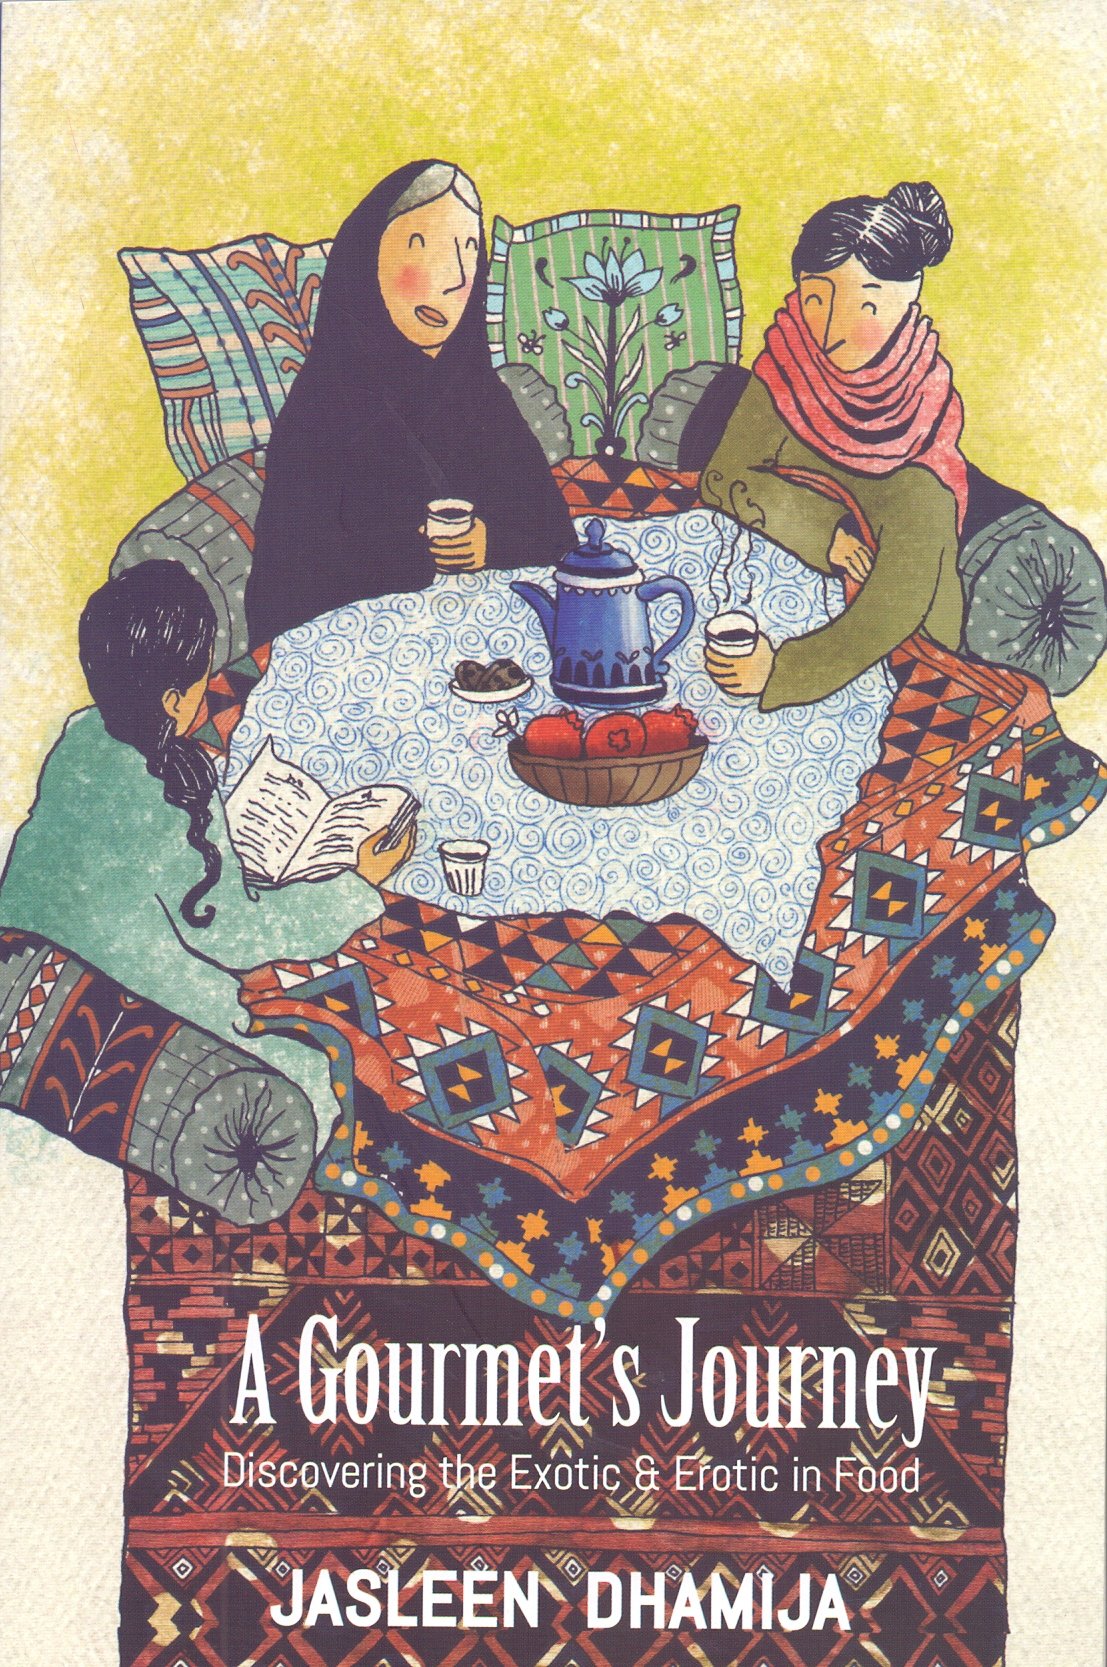 A Gourmet's Journey: Discovering The Exotic & Erotic In Food